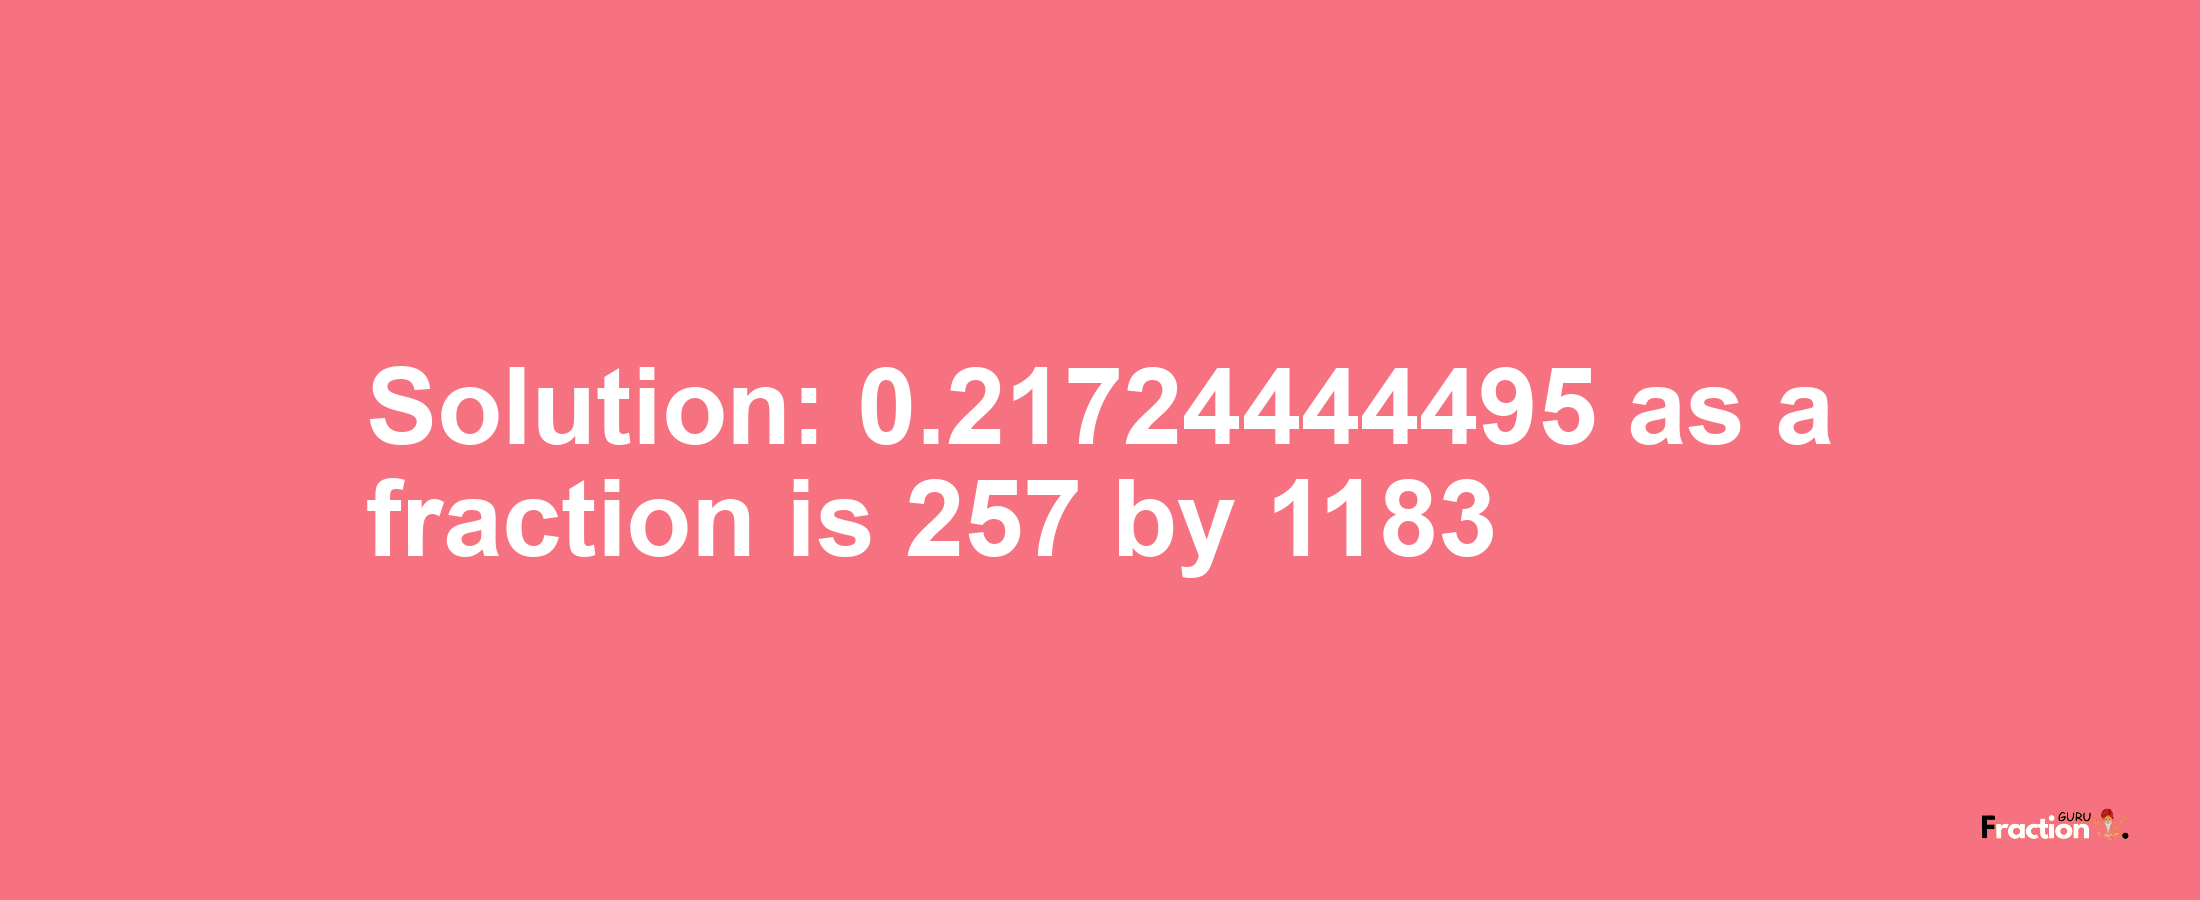 Solution:0.21724444495 as a fraction is 257/1183